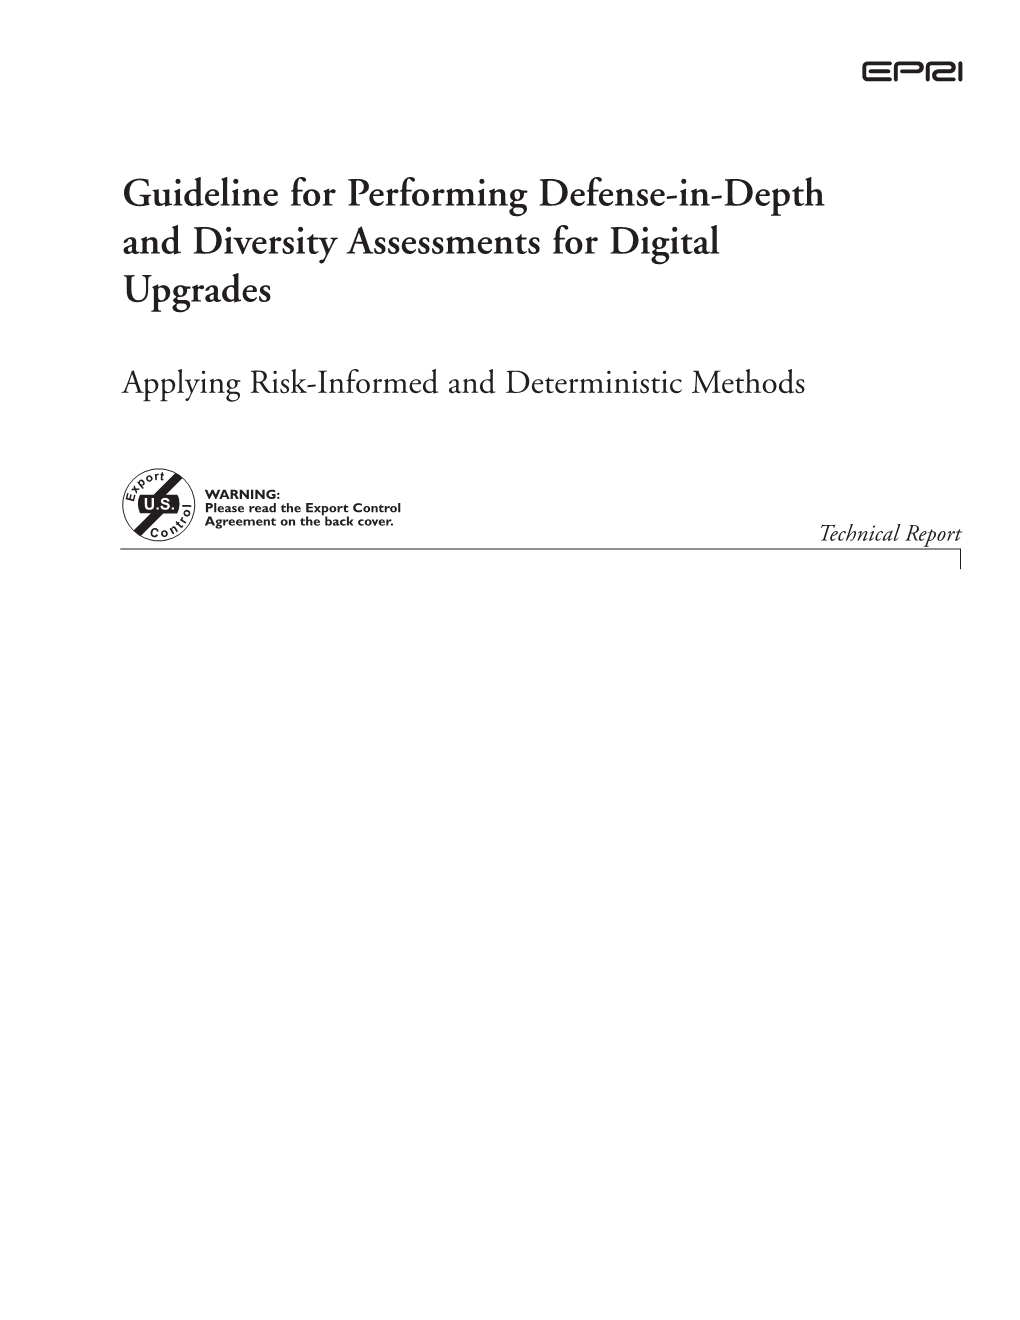 Guideline for Performing Defense-In-Depth and Diversity Assessments for Digital Upgrades, Applying Risk-Info